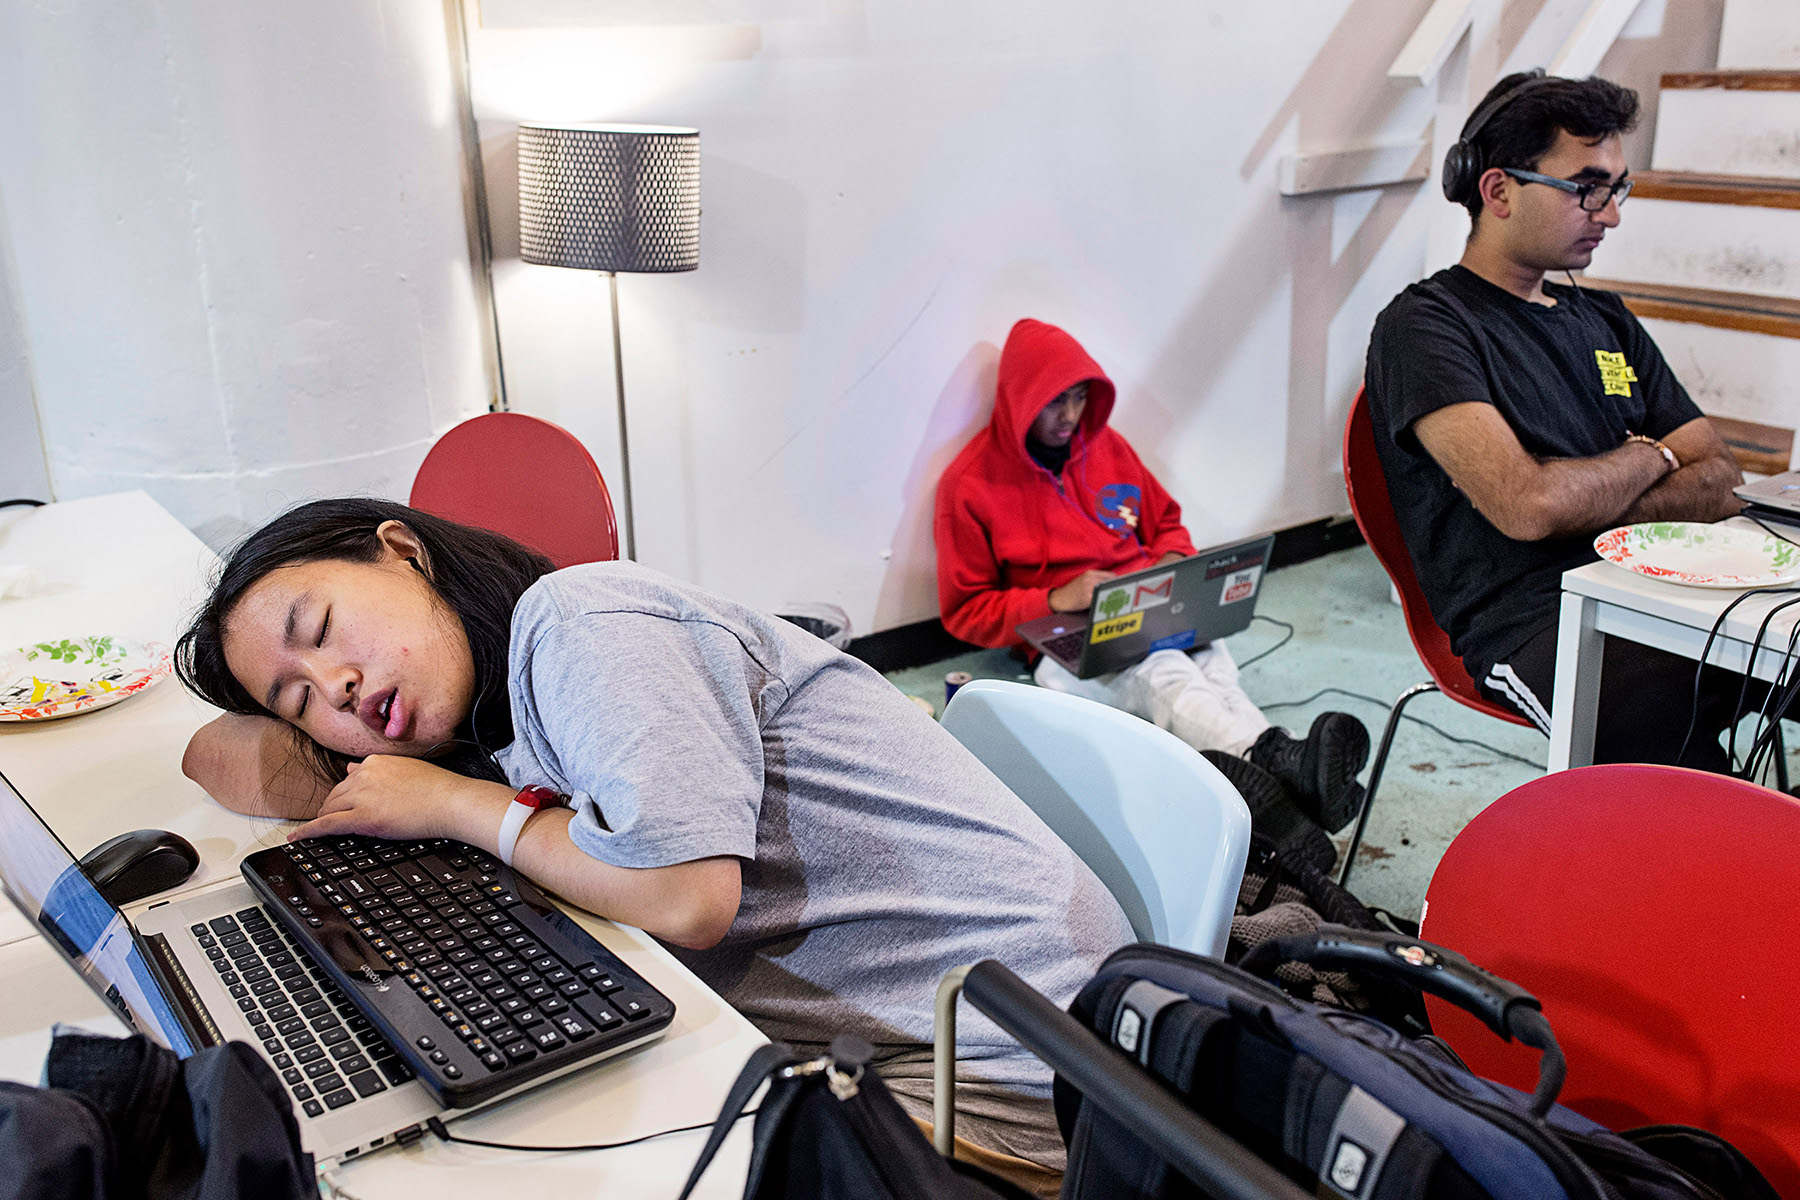 A participant in a hackathon organized by the company Shirts.io sleeps at her computer during the in San Francsico, California in August 2014. This hackathon lasted 37 hours and many participants stayed the entire time, taking breaks to sleep where and when they could.